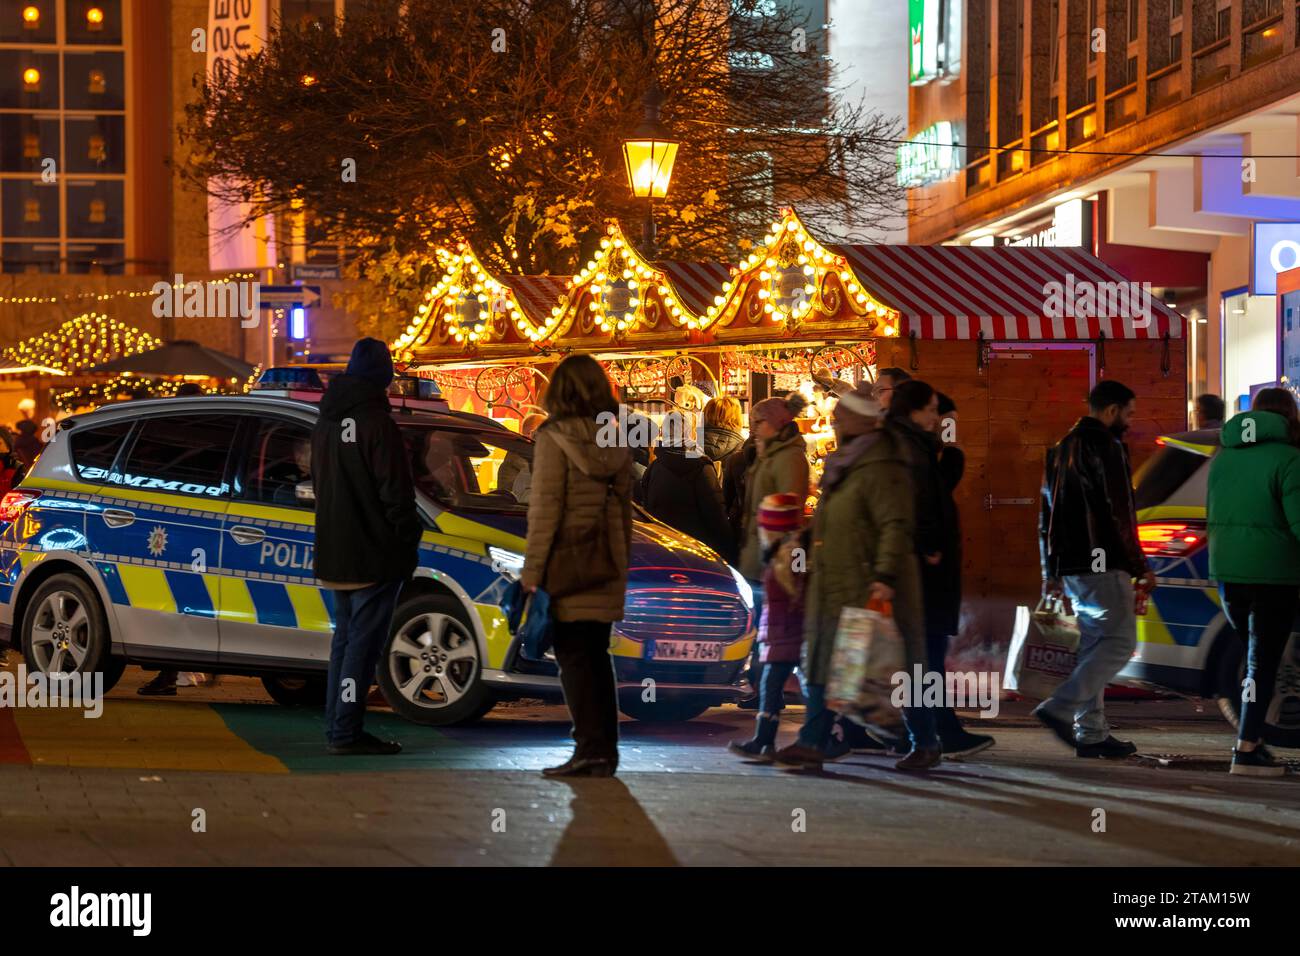 Police patrol in the pre-Christmas period, Christmas market in the city centre of Essen, Kettwiger Straße, NRW, Germany, Stock Photo